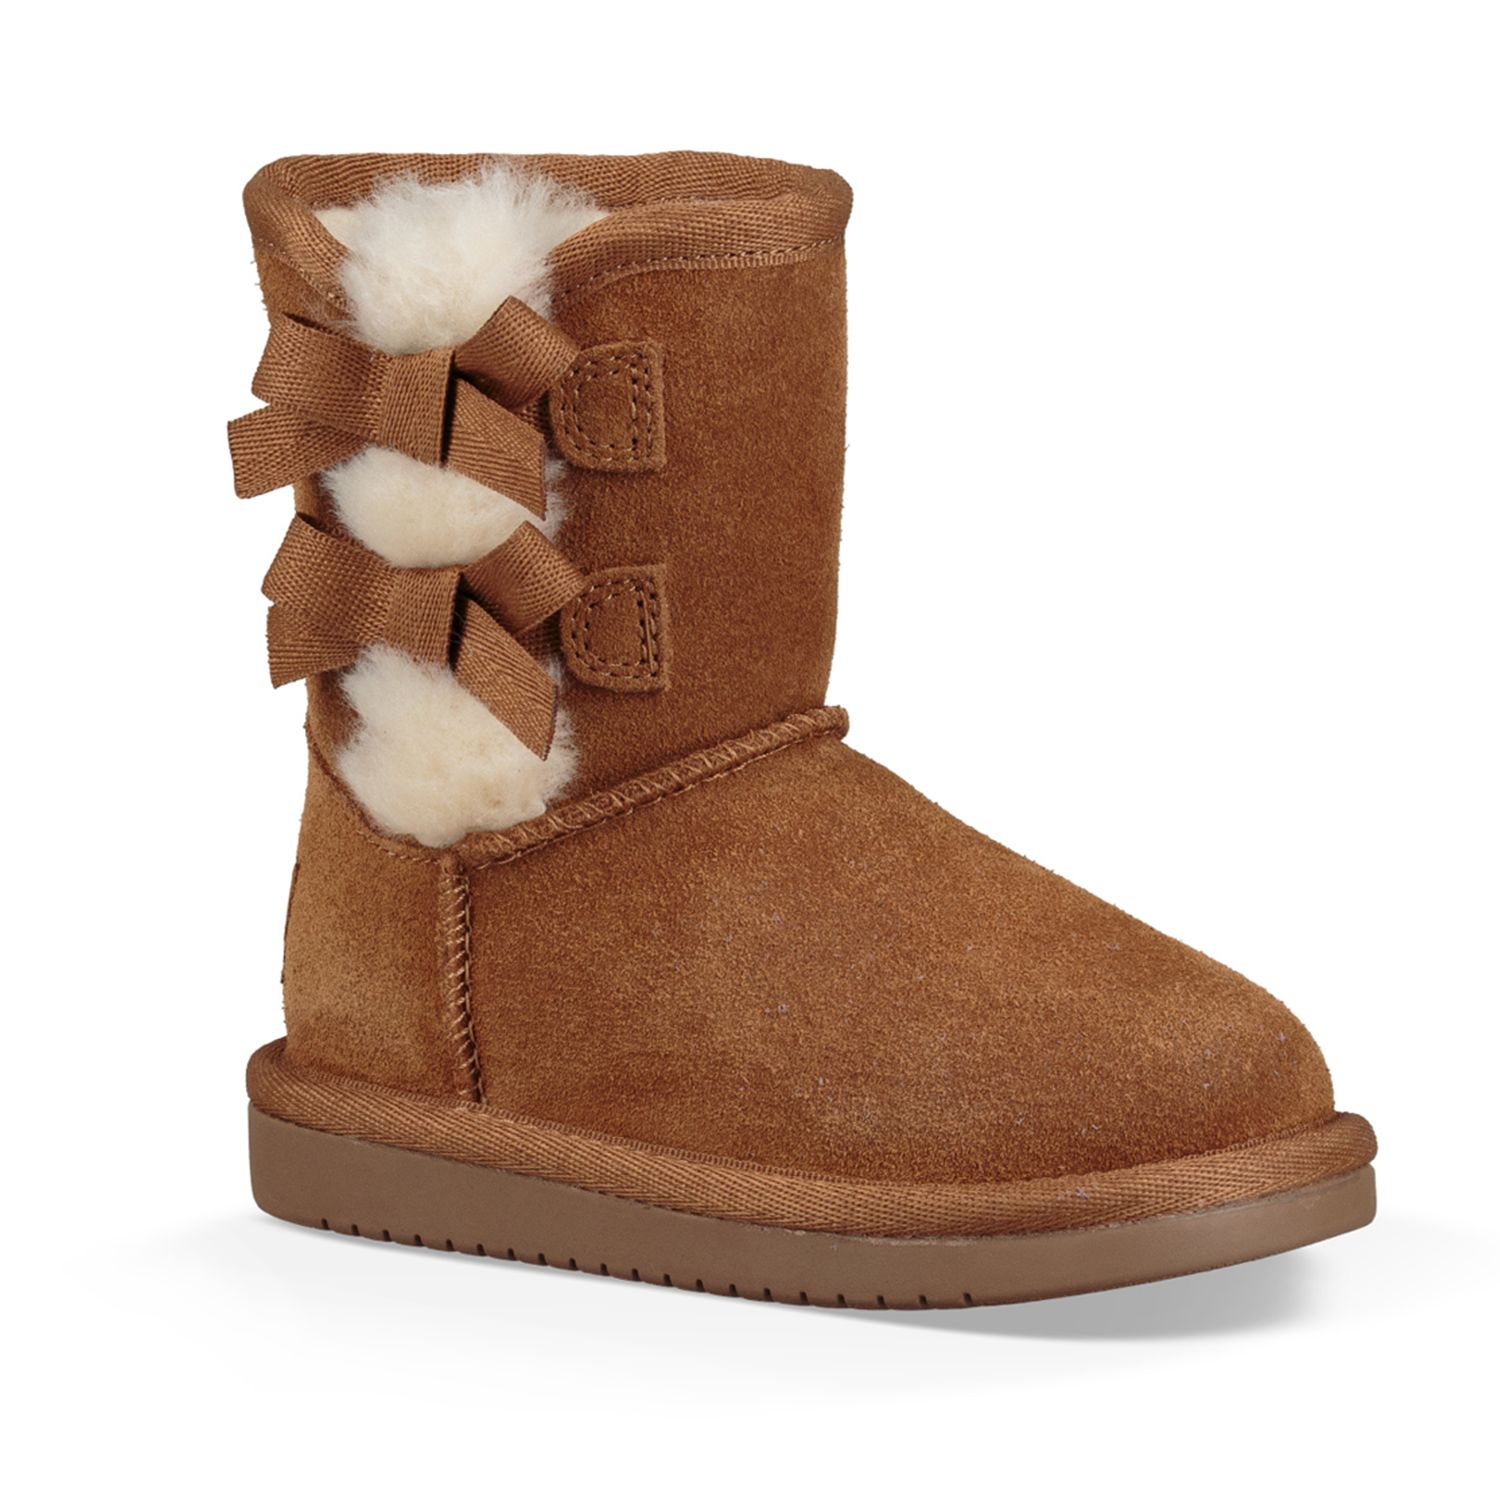 uggs boots at kohls